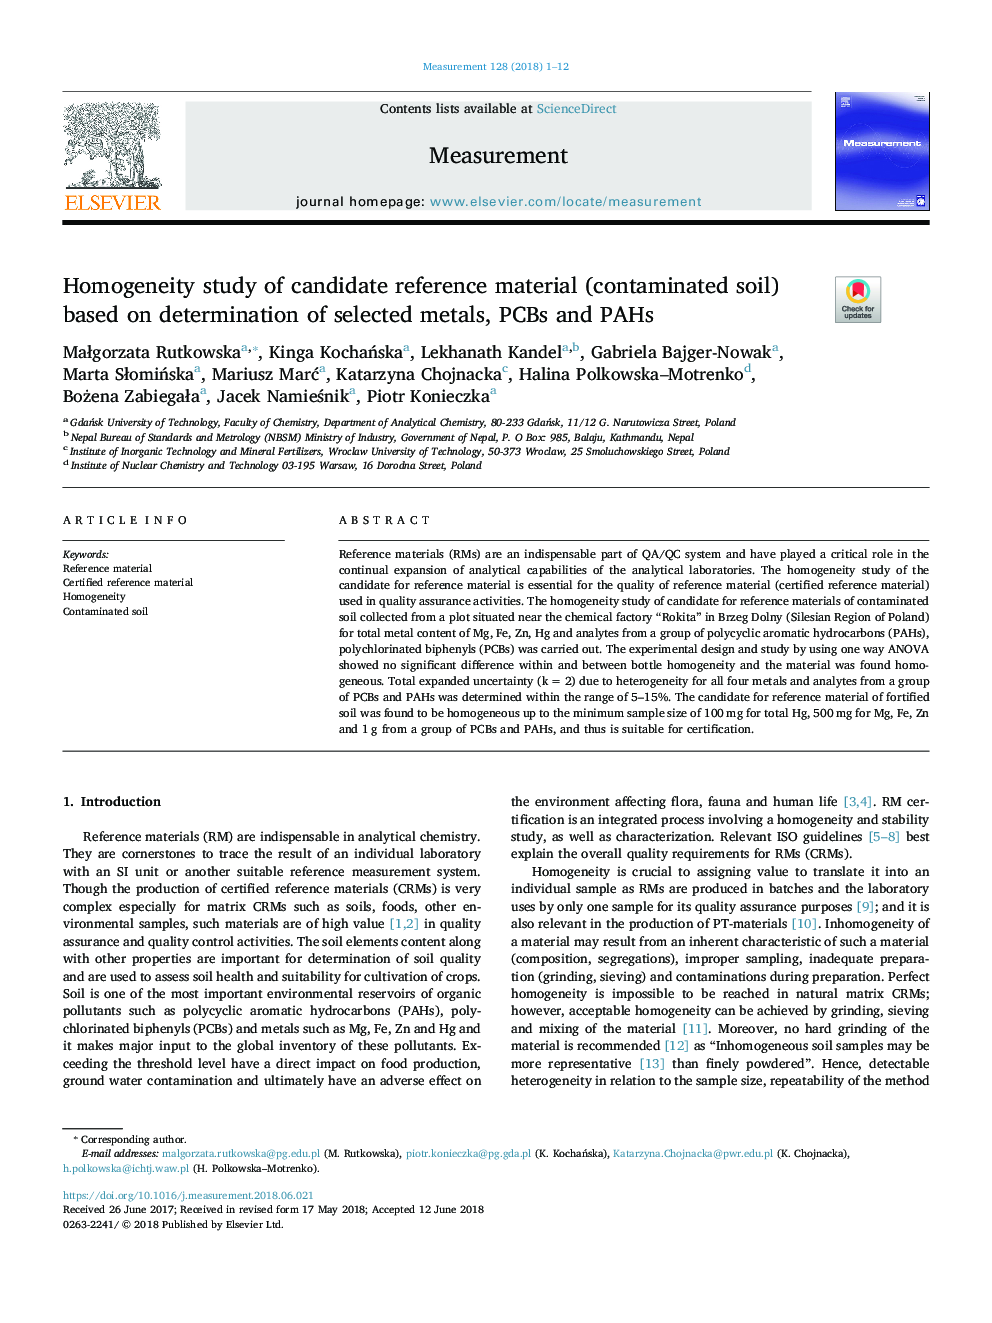 Homogeneity study of candidate reference material (contaminated soil) based on determination of selected metals, PCBs and PAHs